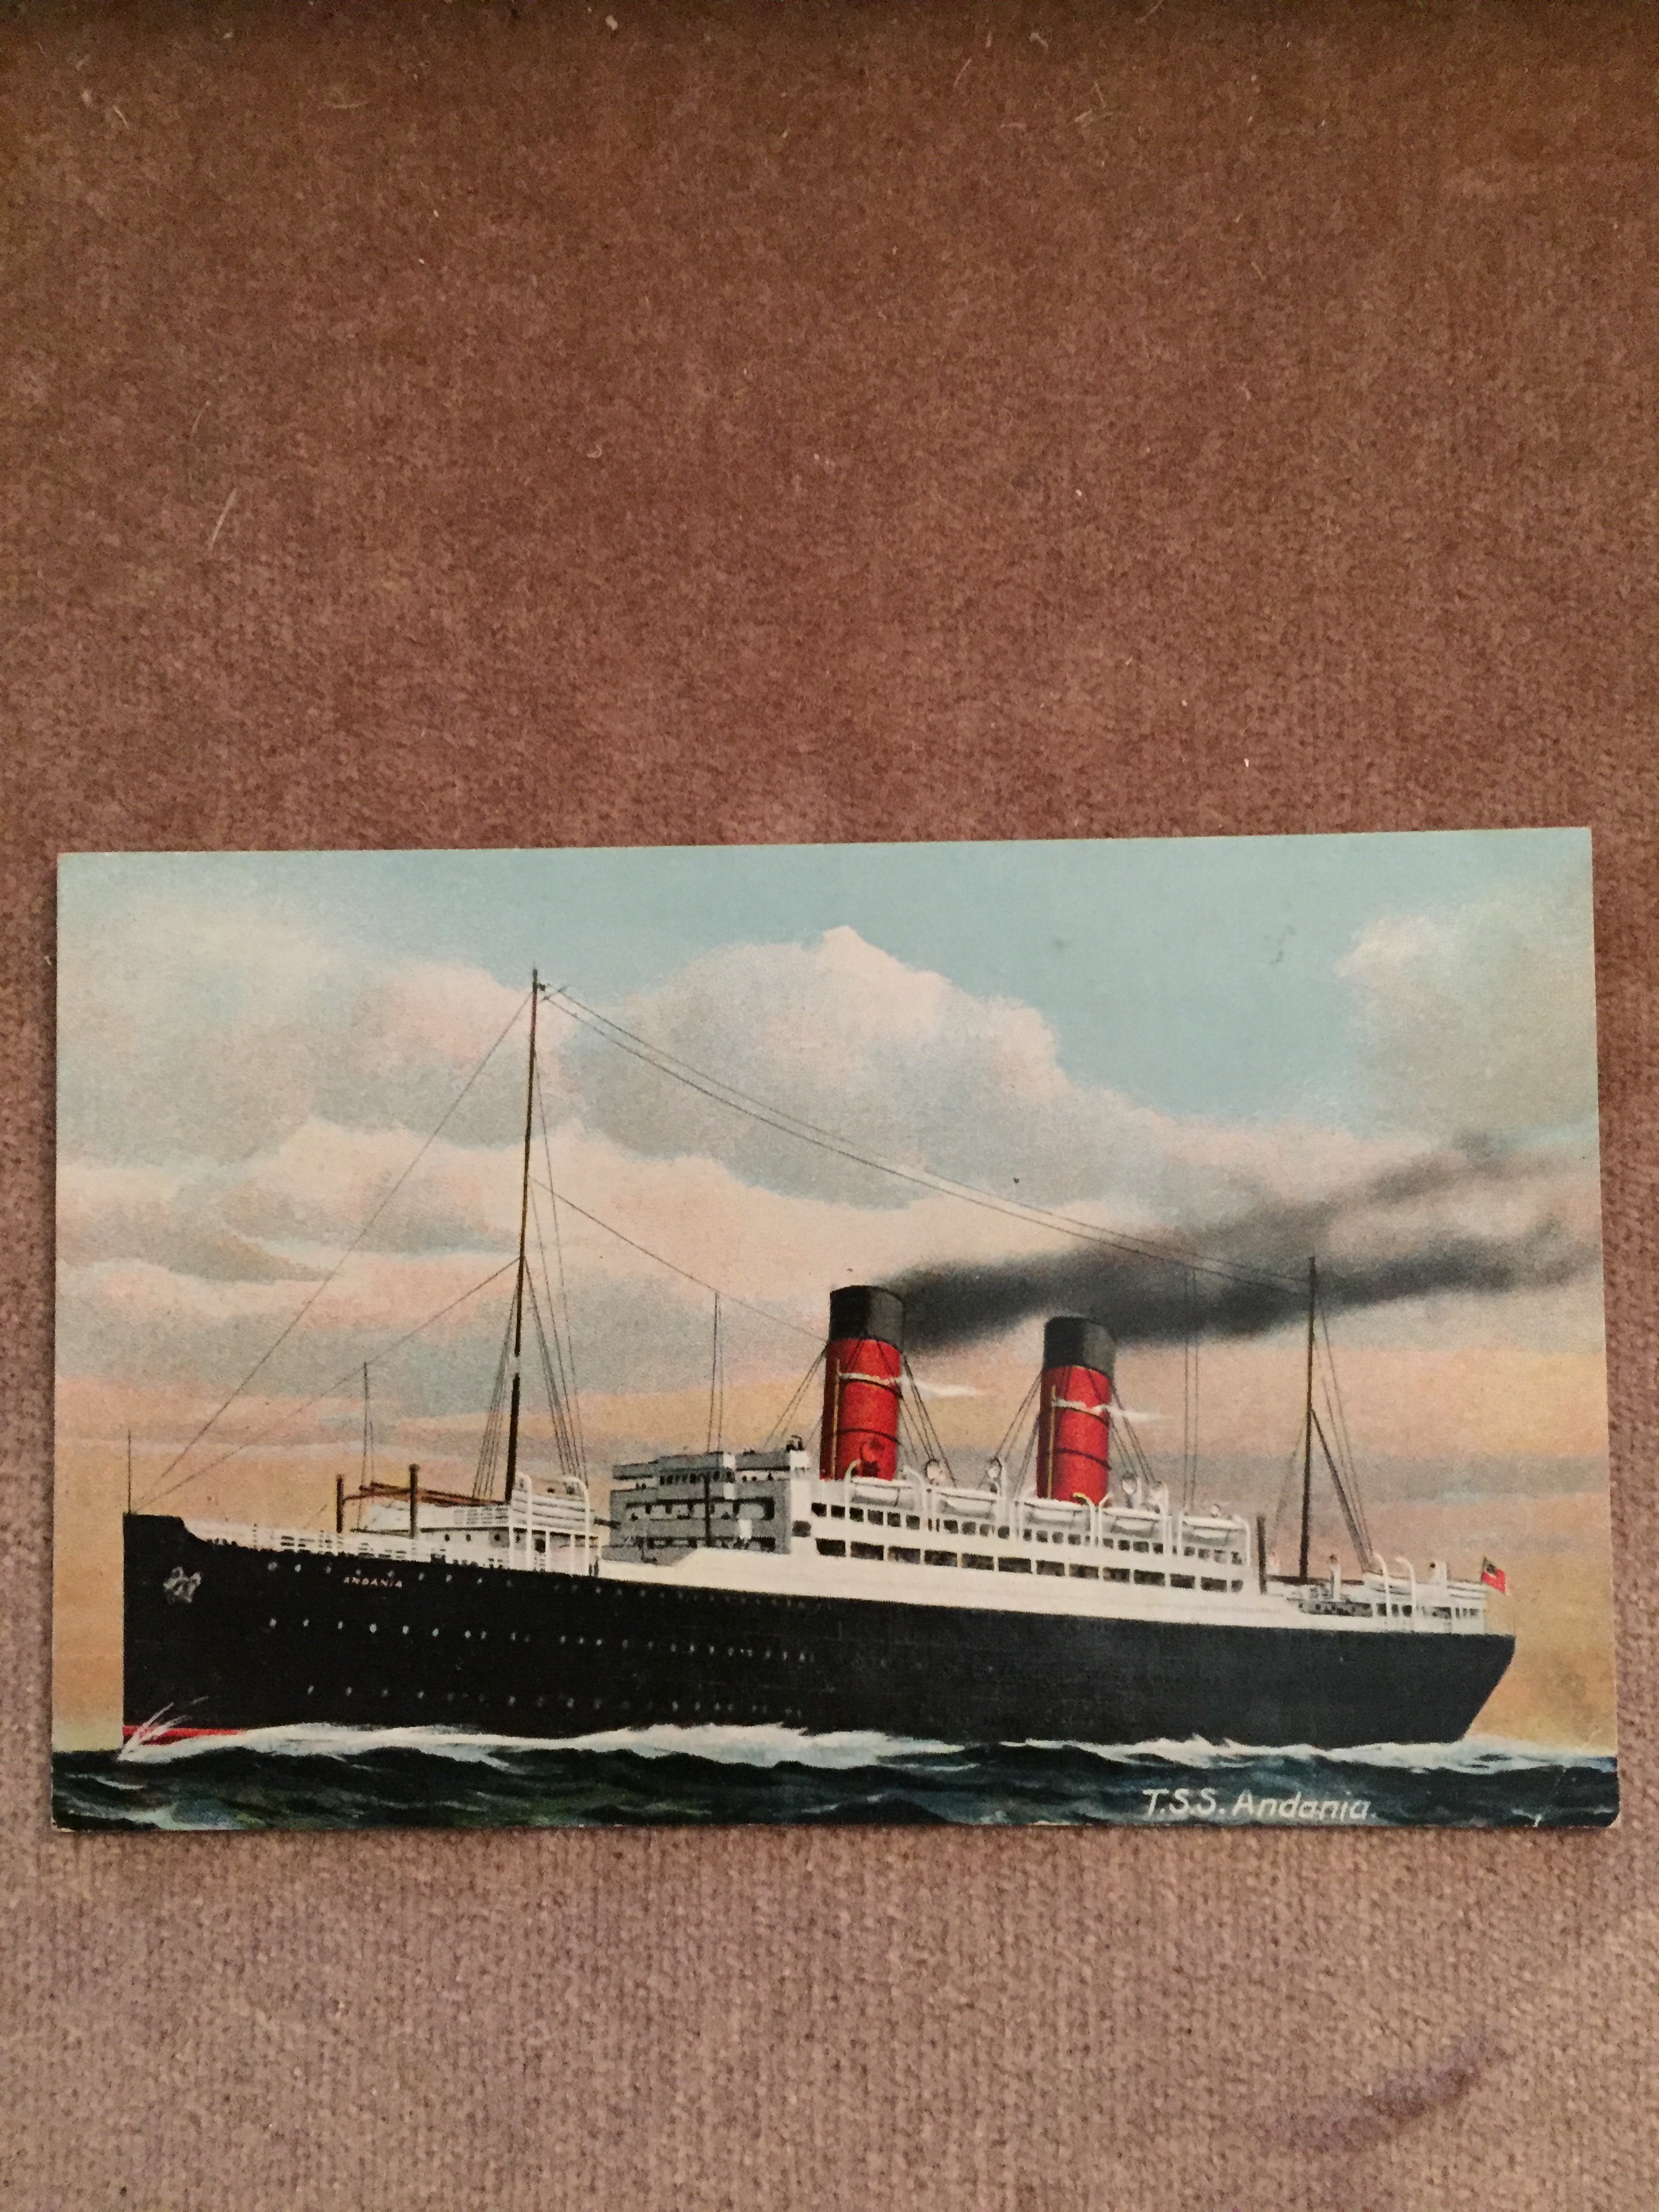 UNUSED COLOUR POSTCARD FROM THE OLD VESSEL THE TSS ANDONIA